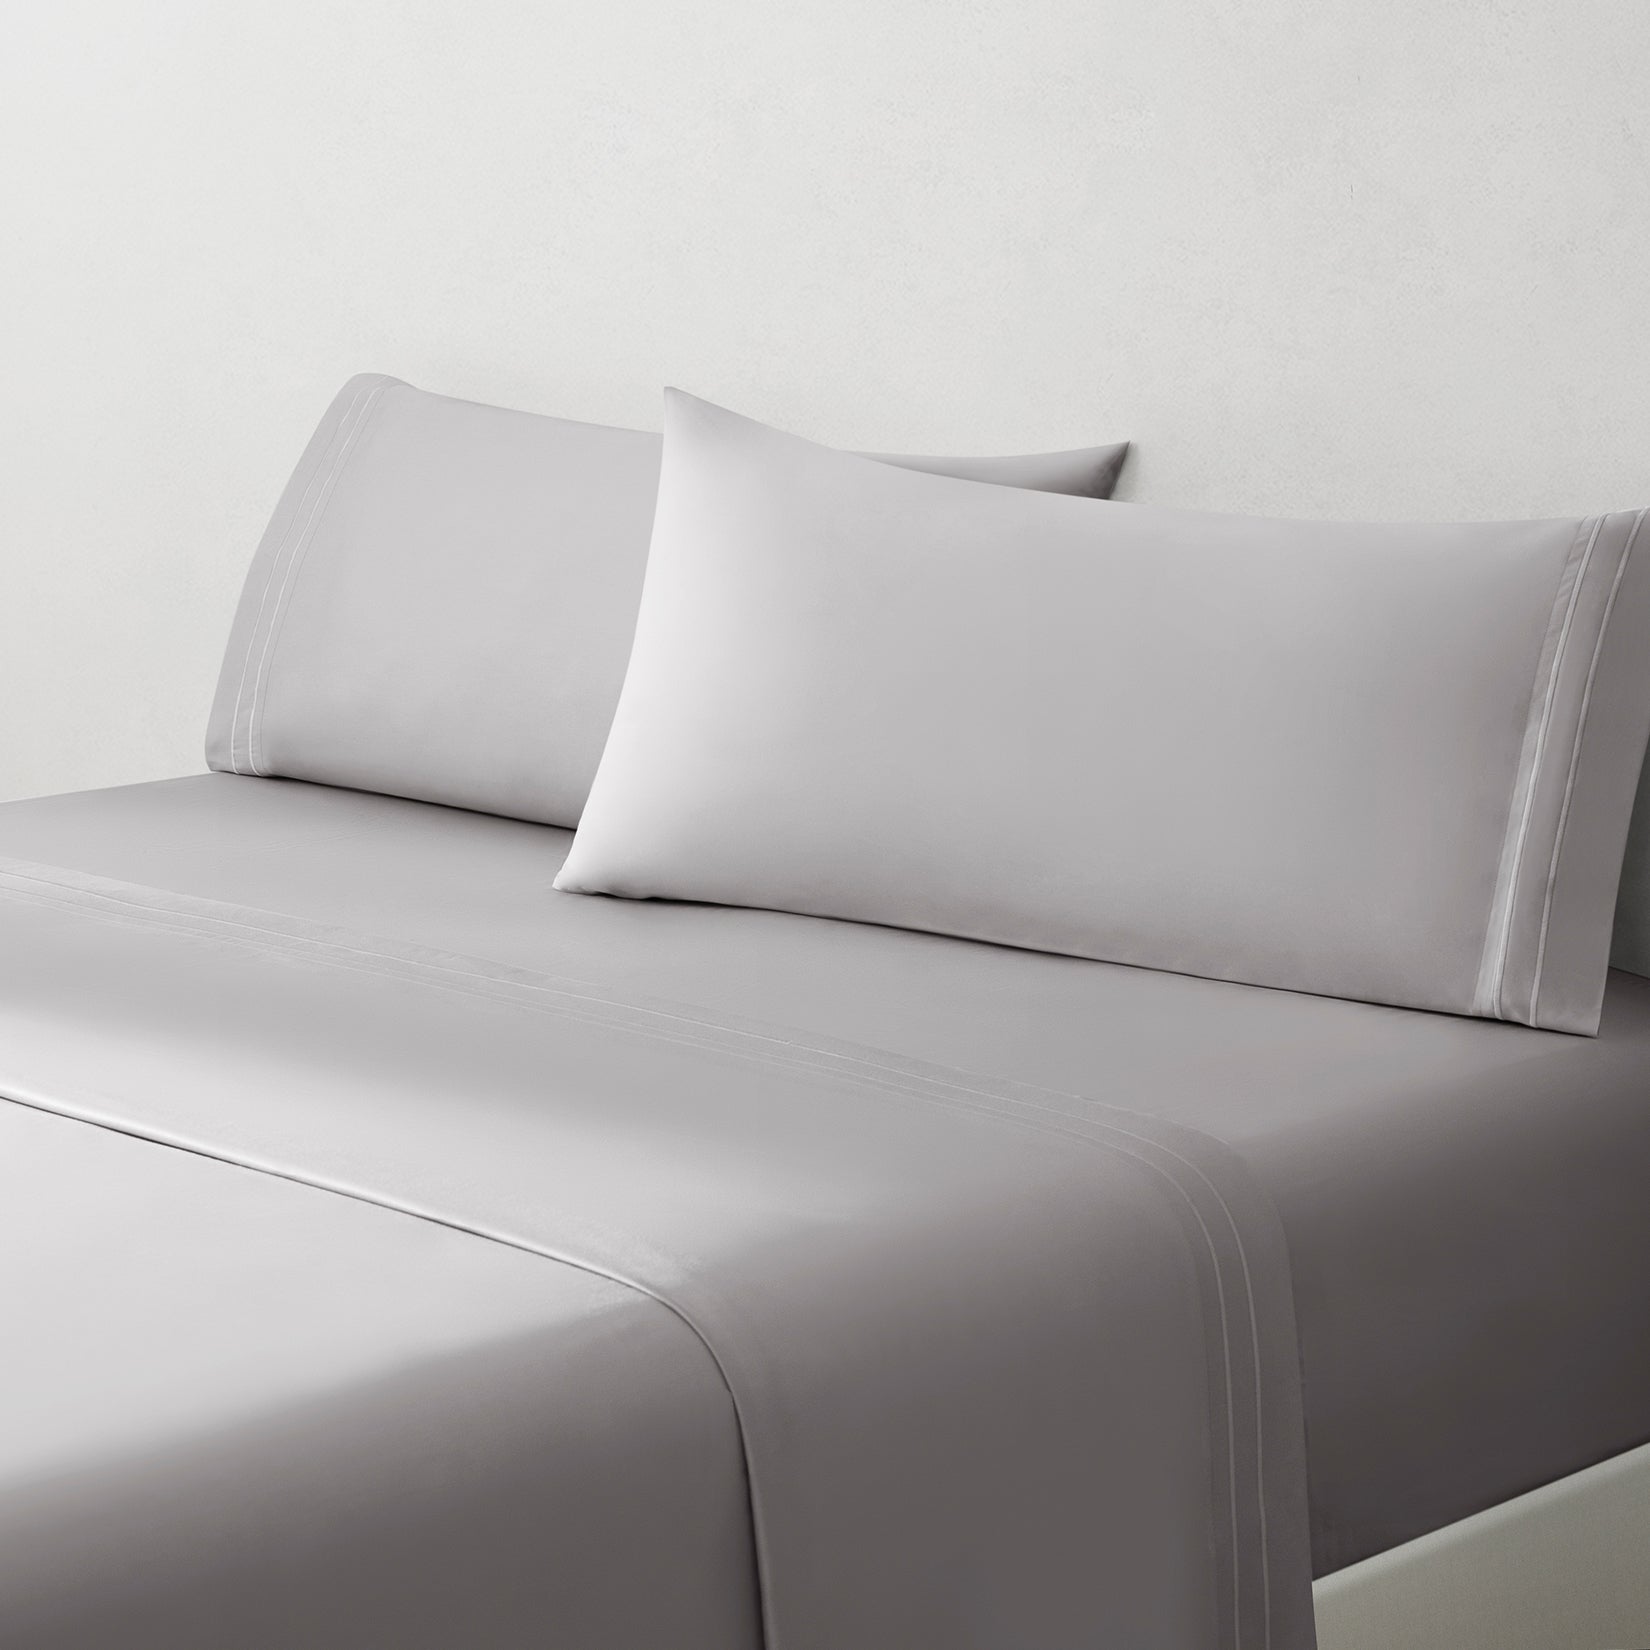 Sofia Foggy Gray Double Satin Stitched Cuff 300 thread count cotton bed sheet set. White pillows and white cotton sheets on bed from side angle.